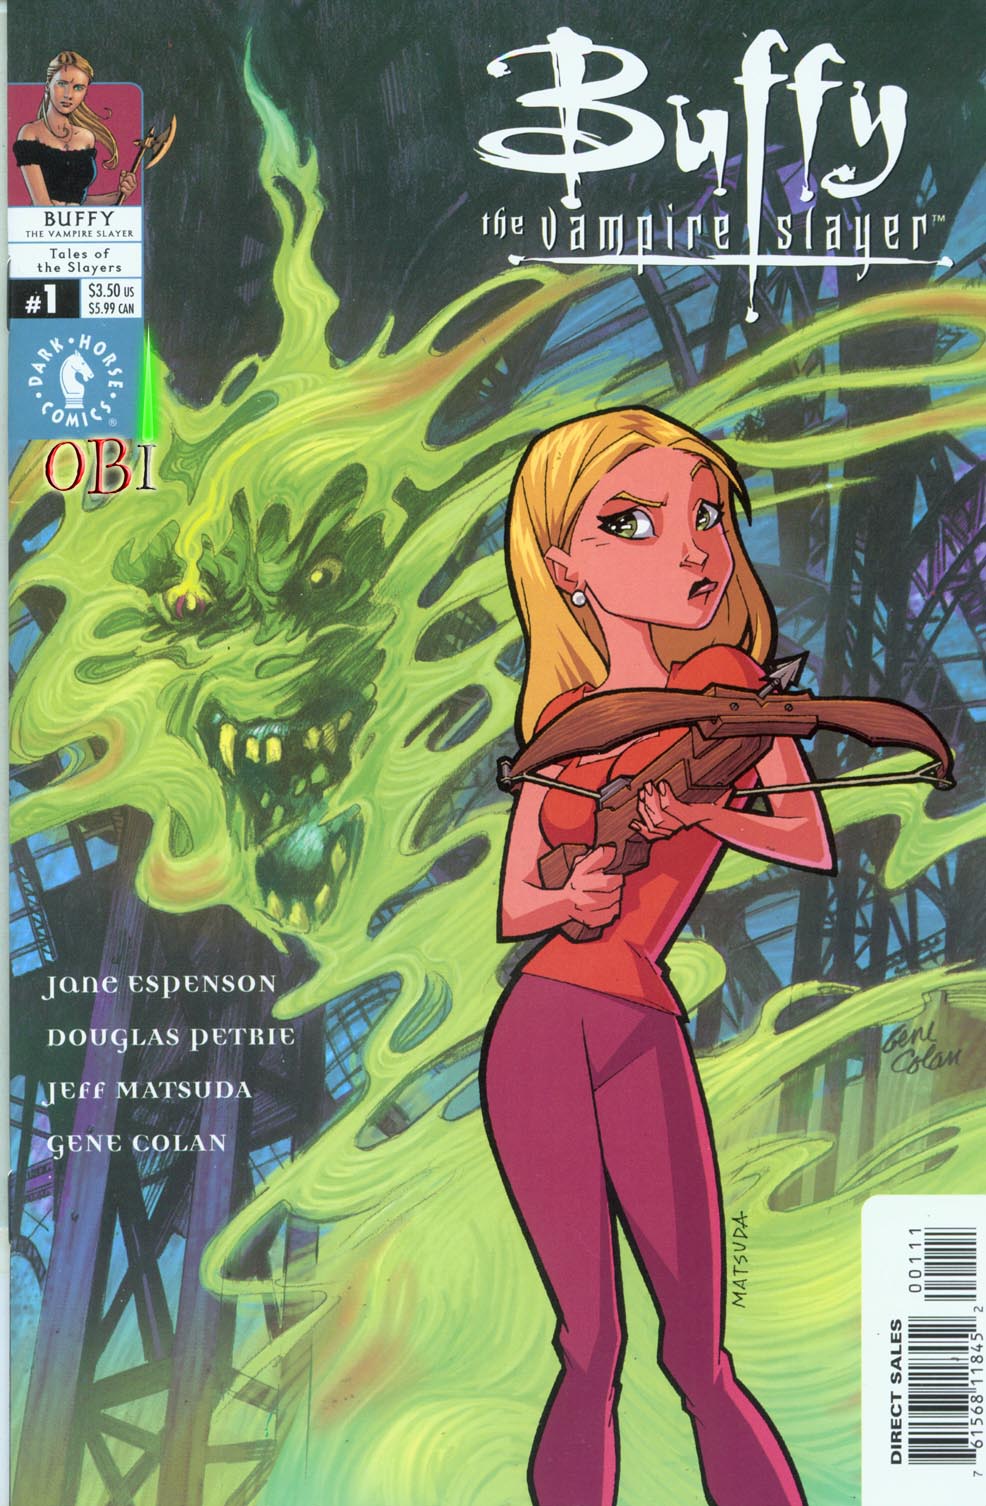 Buffy the Vampire Slayer (1998) Tales of the Slayer no. 1 - Used